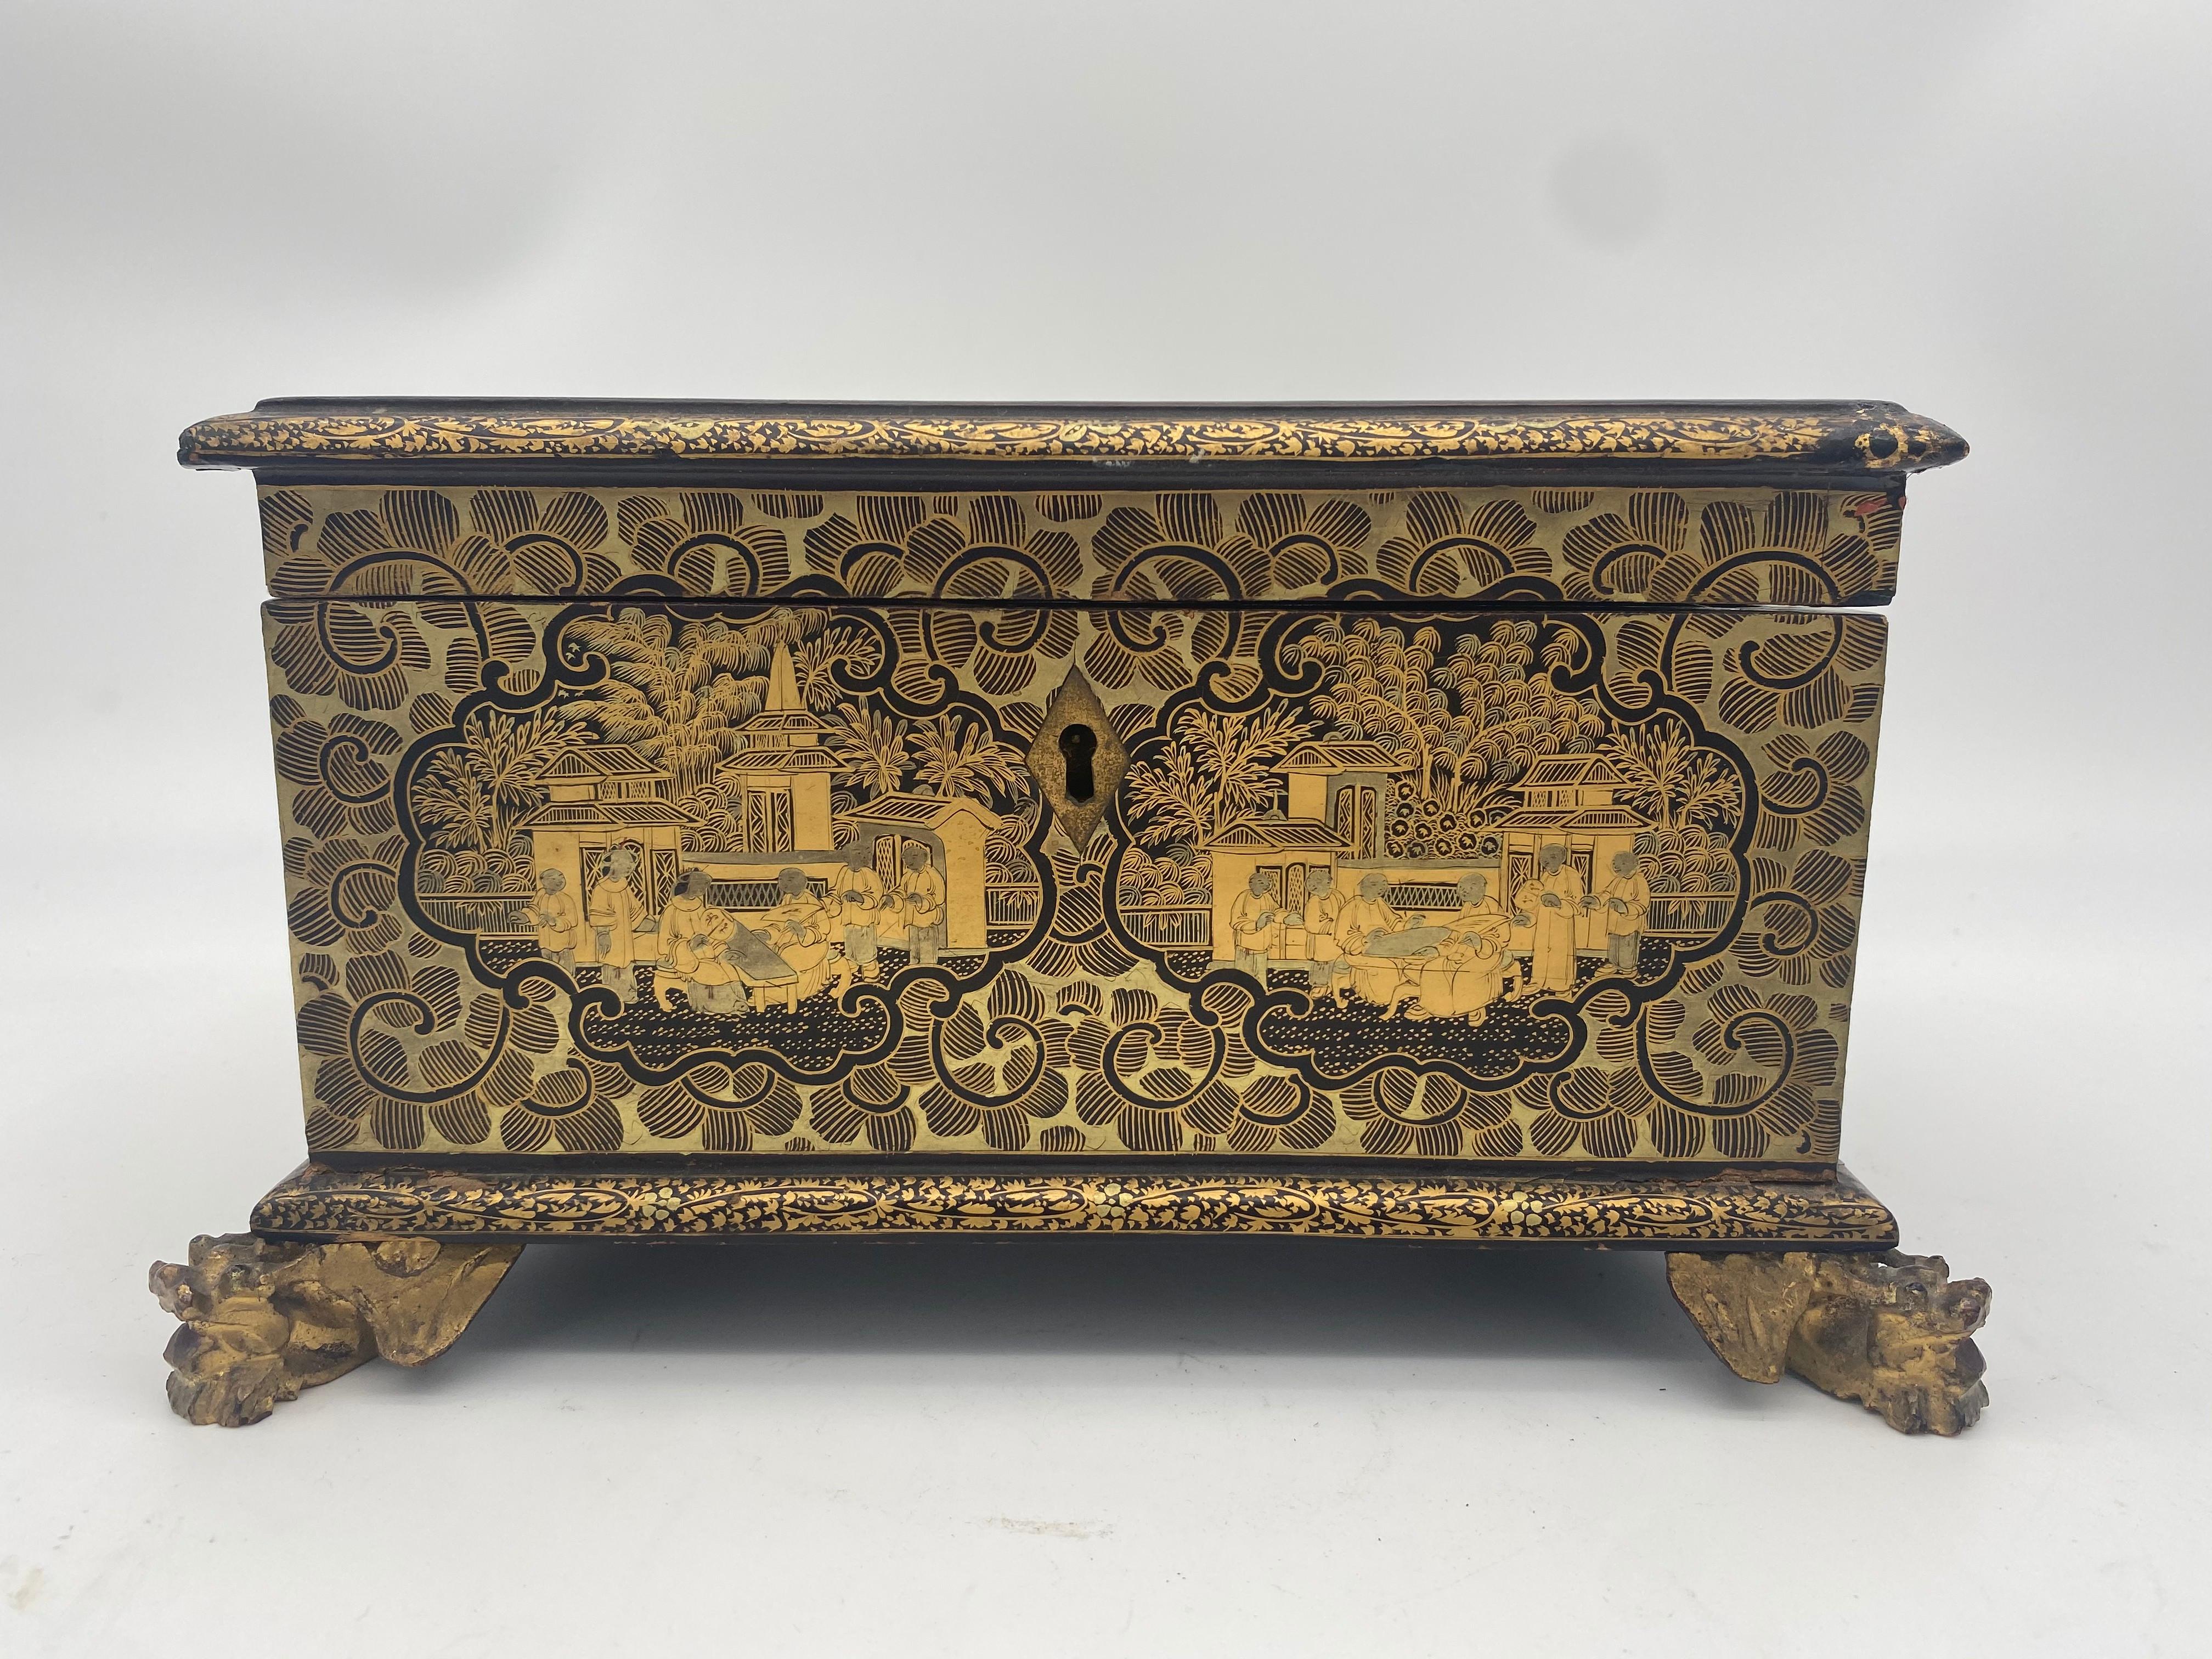 19th century lift-lid gilt-decorated golden black lacquer Chinese jewelry box with dragon feet and key.